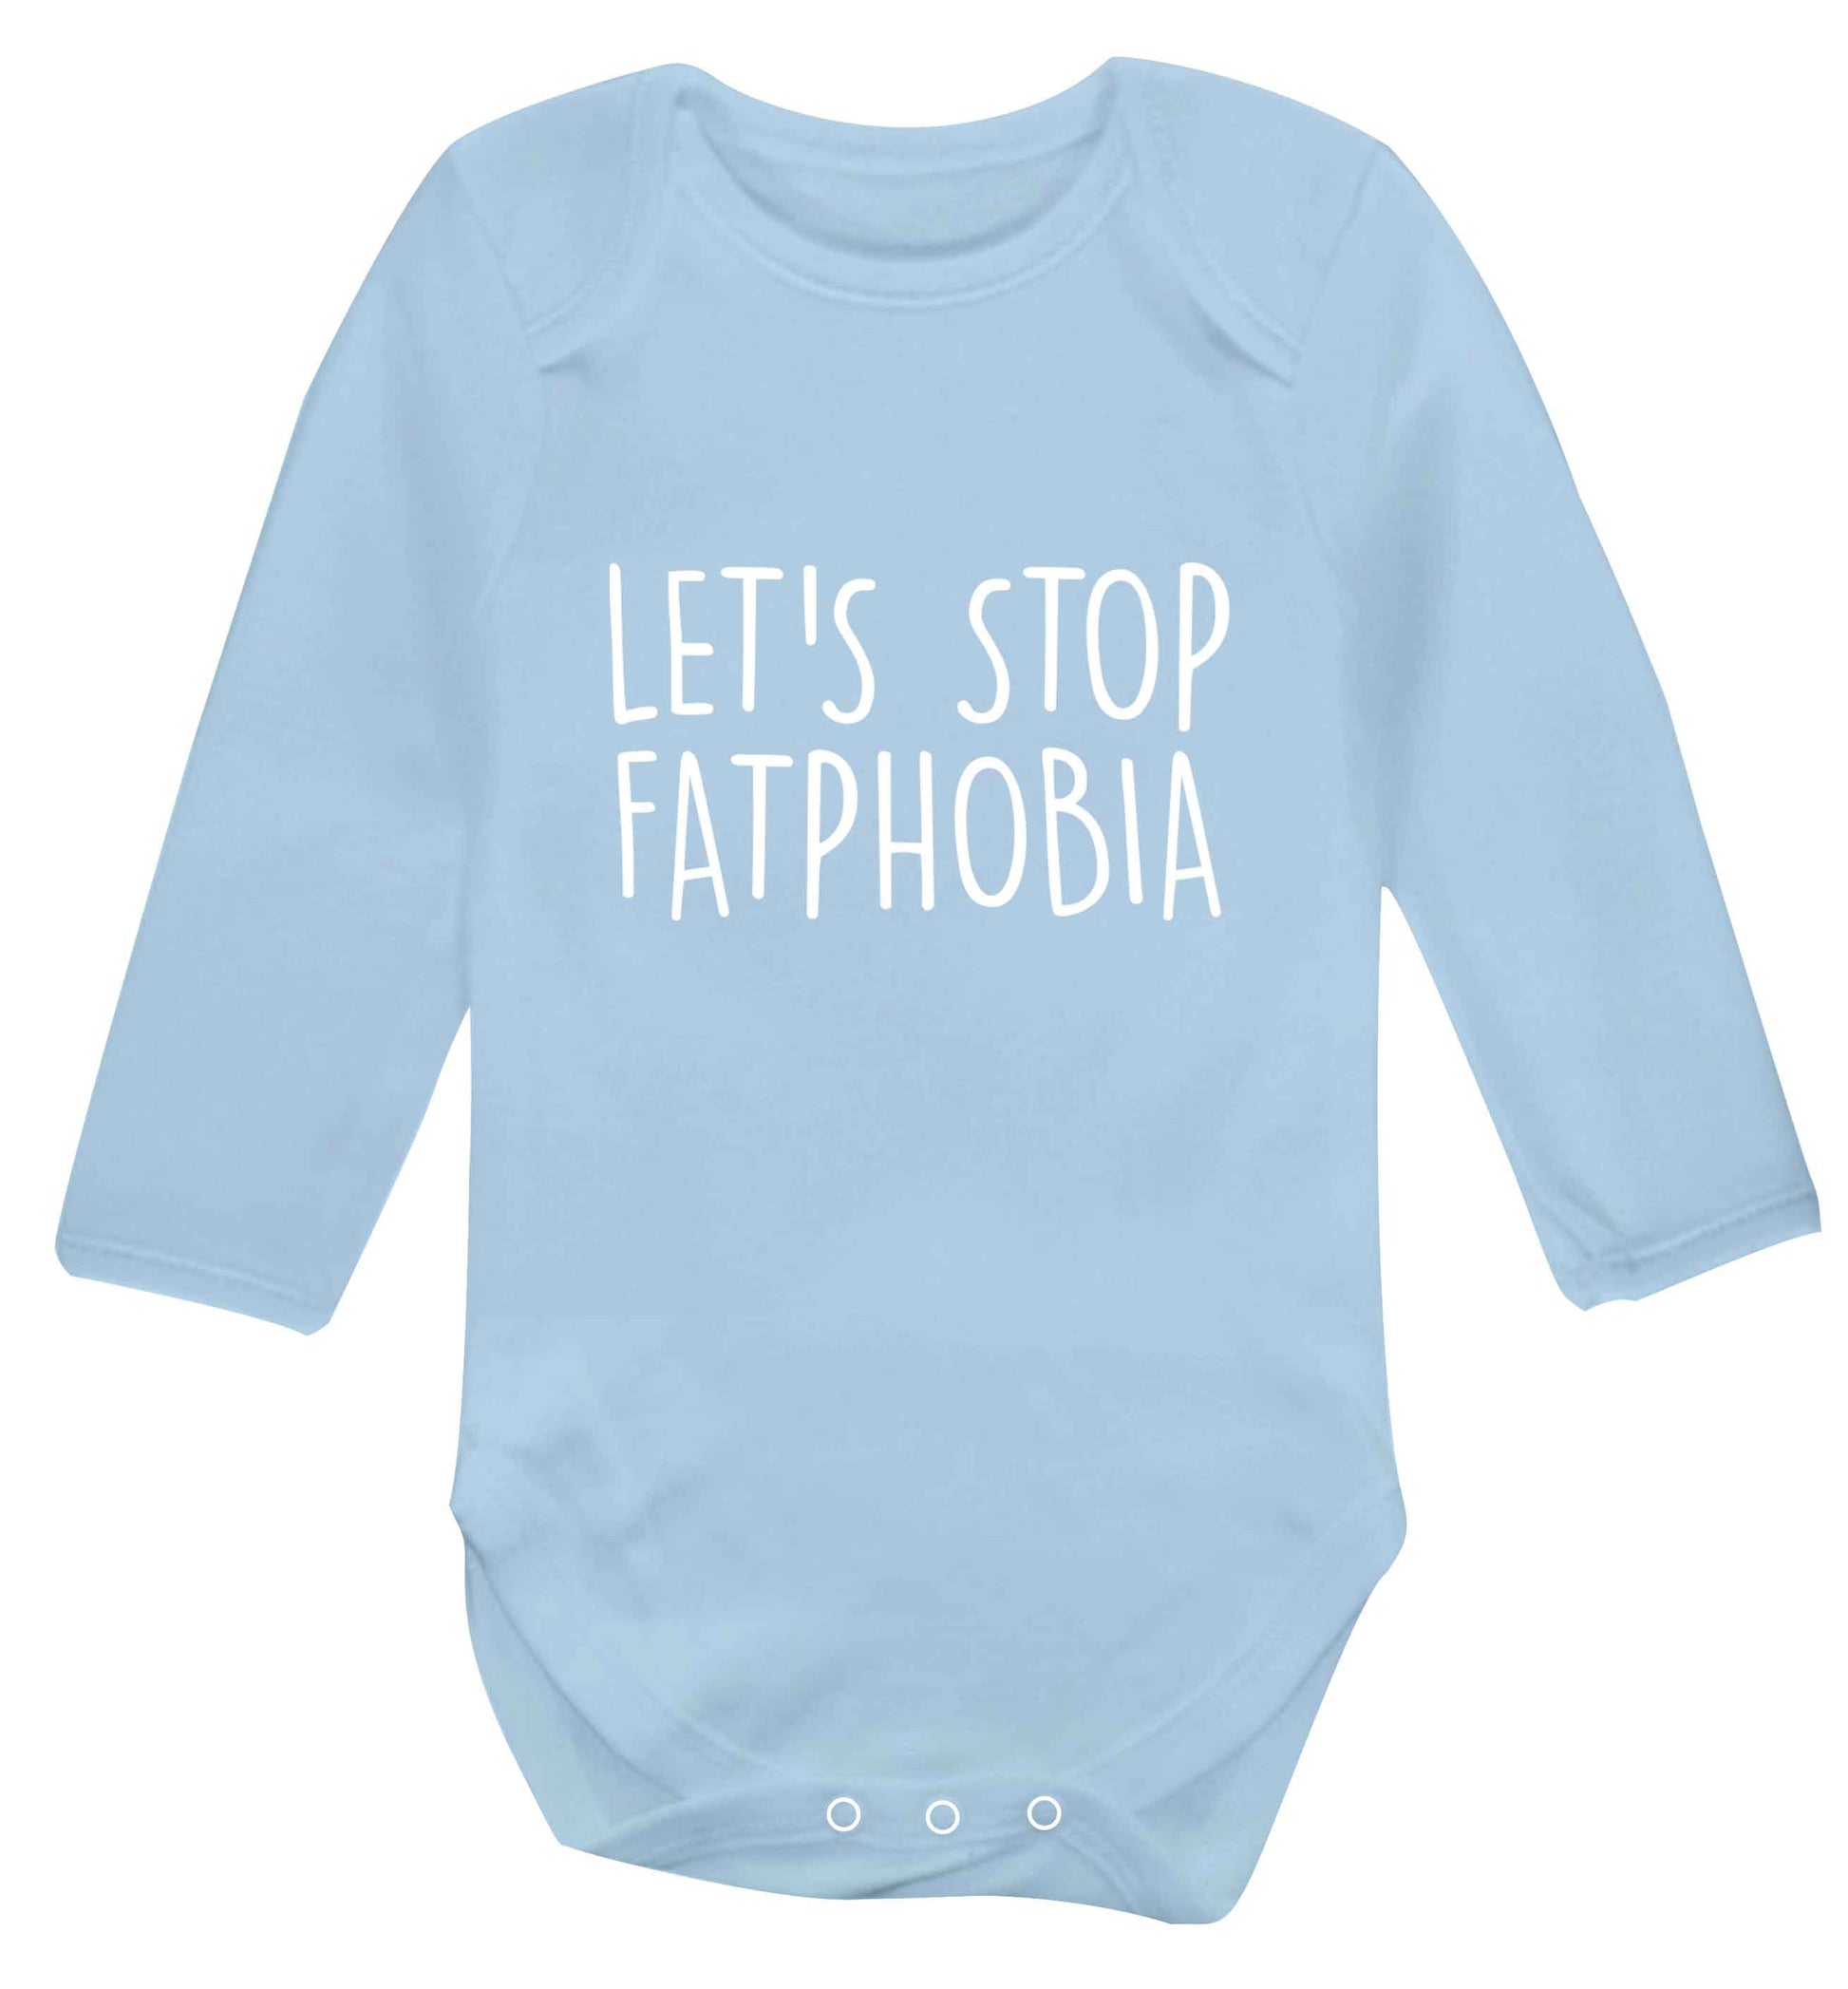 Let's stop fatphobia baby vest long sleeved pale blue 6-12 months